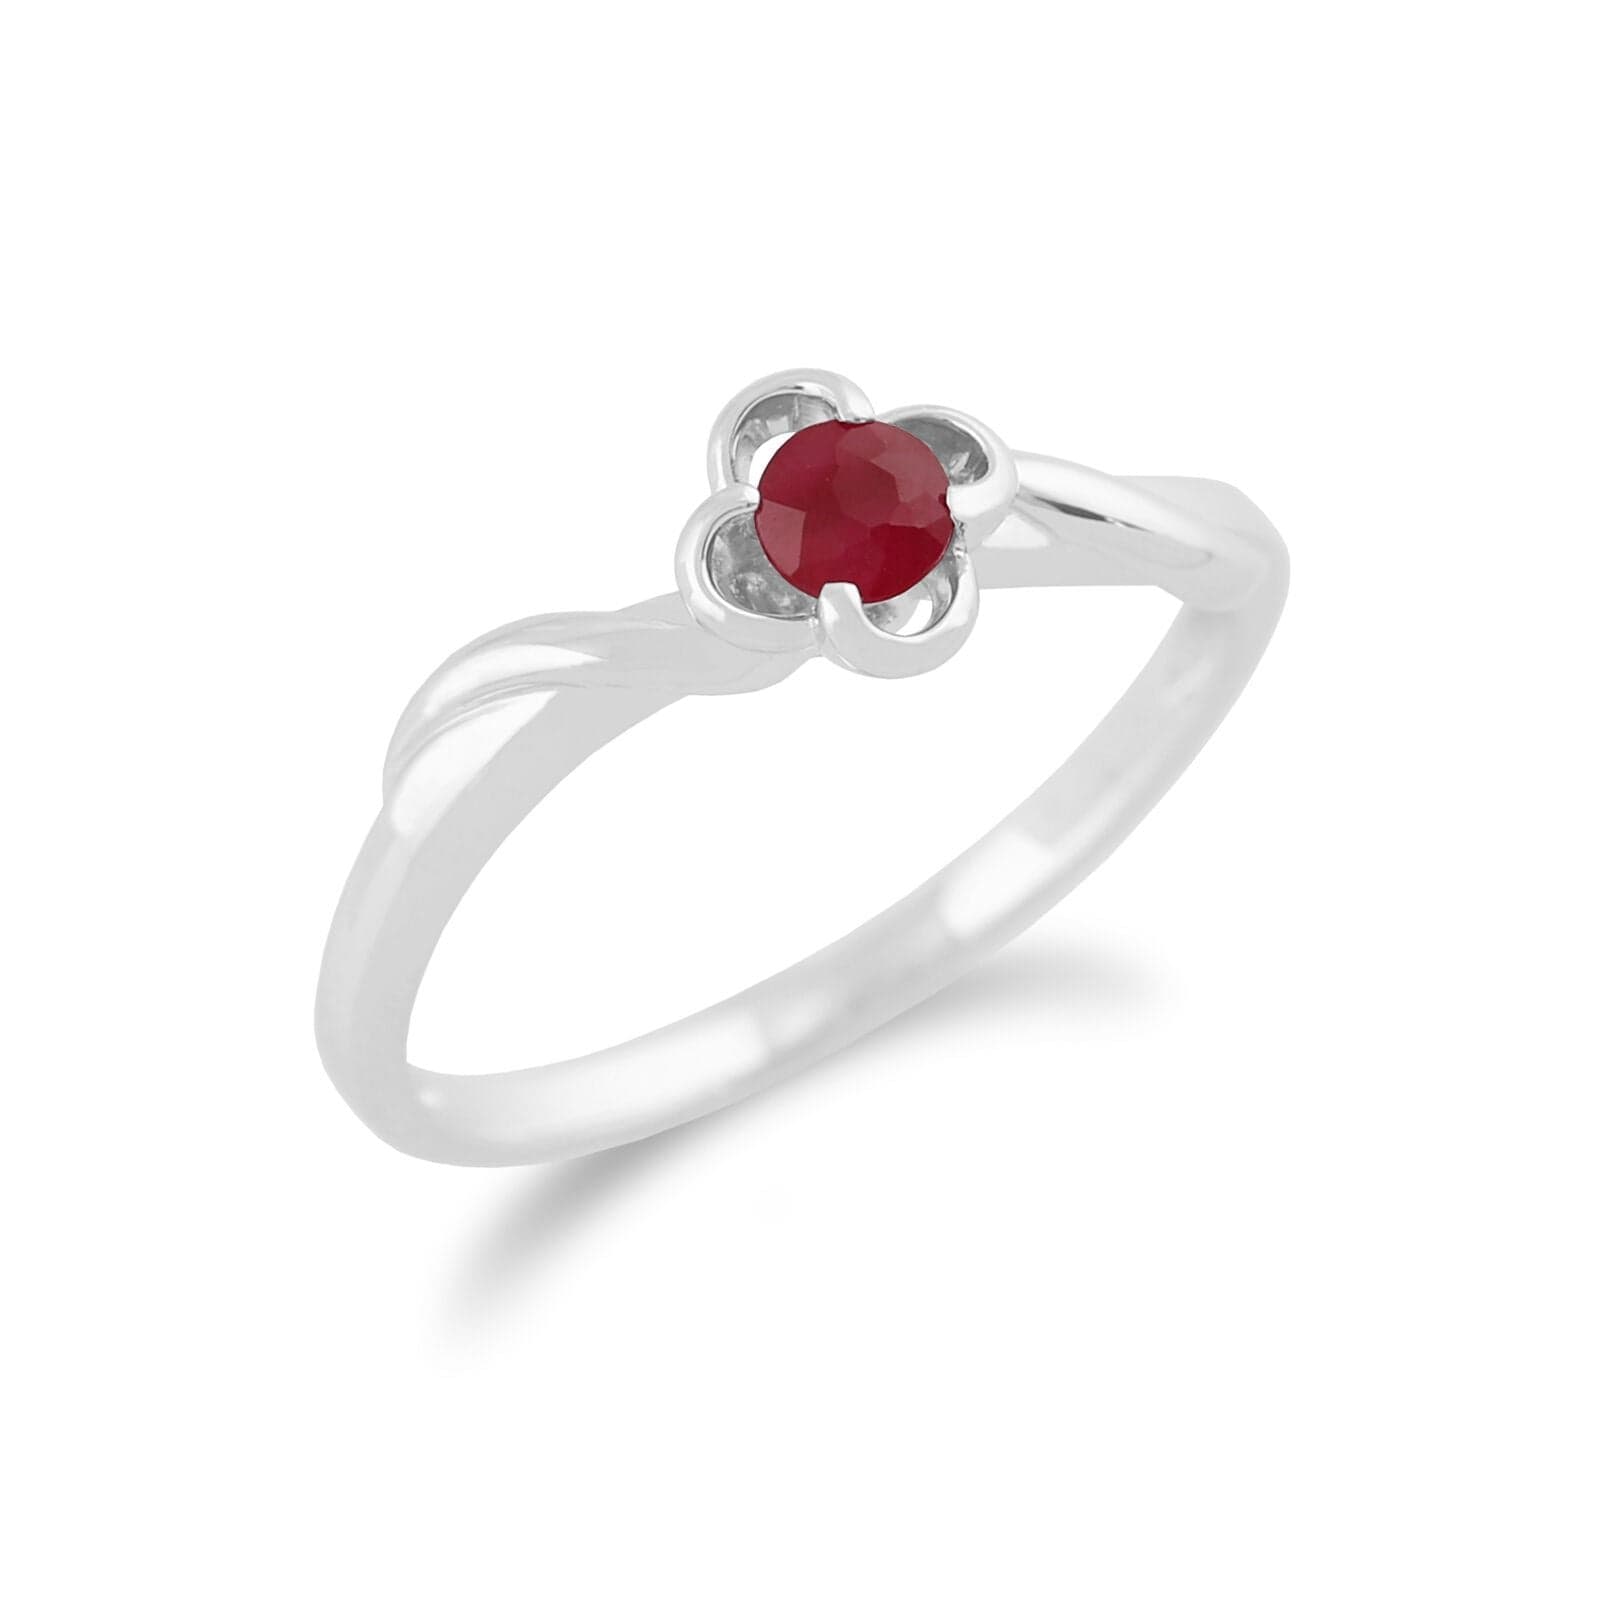 162R0134039 Gemondo 9ct White Gold 0.27ct Ruby Floral Ring 2